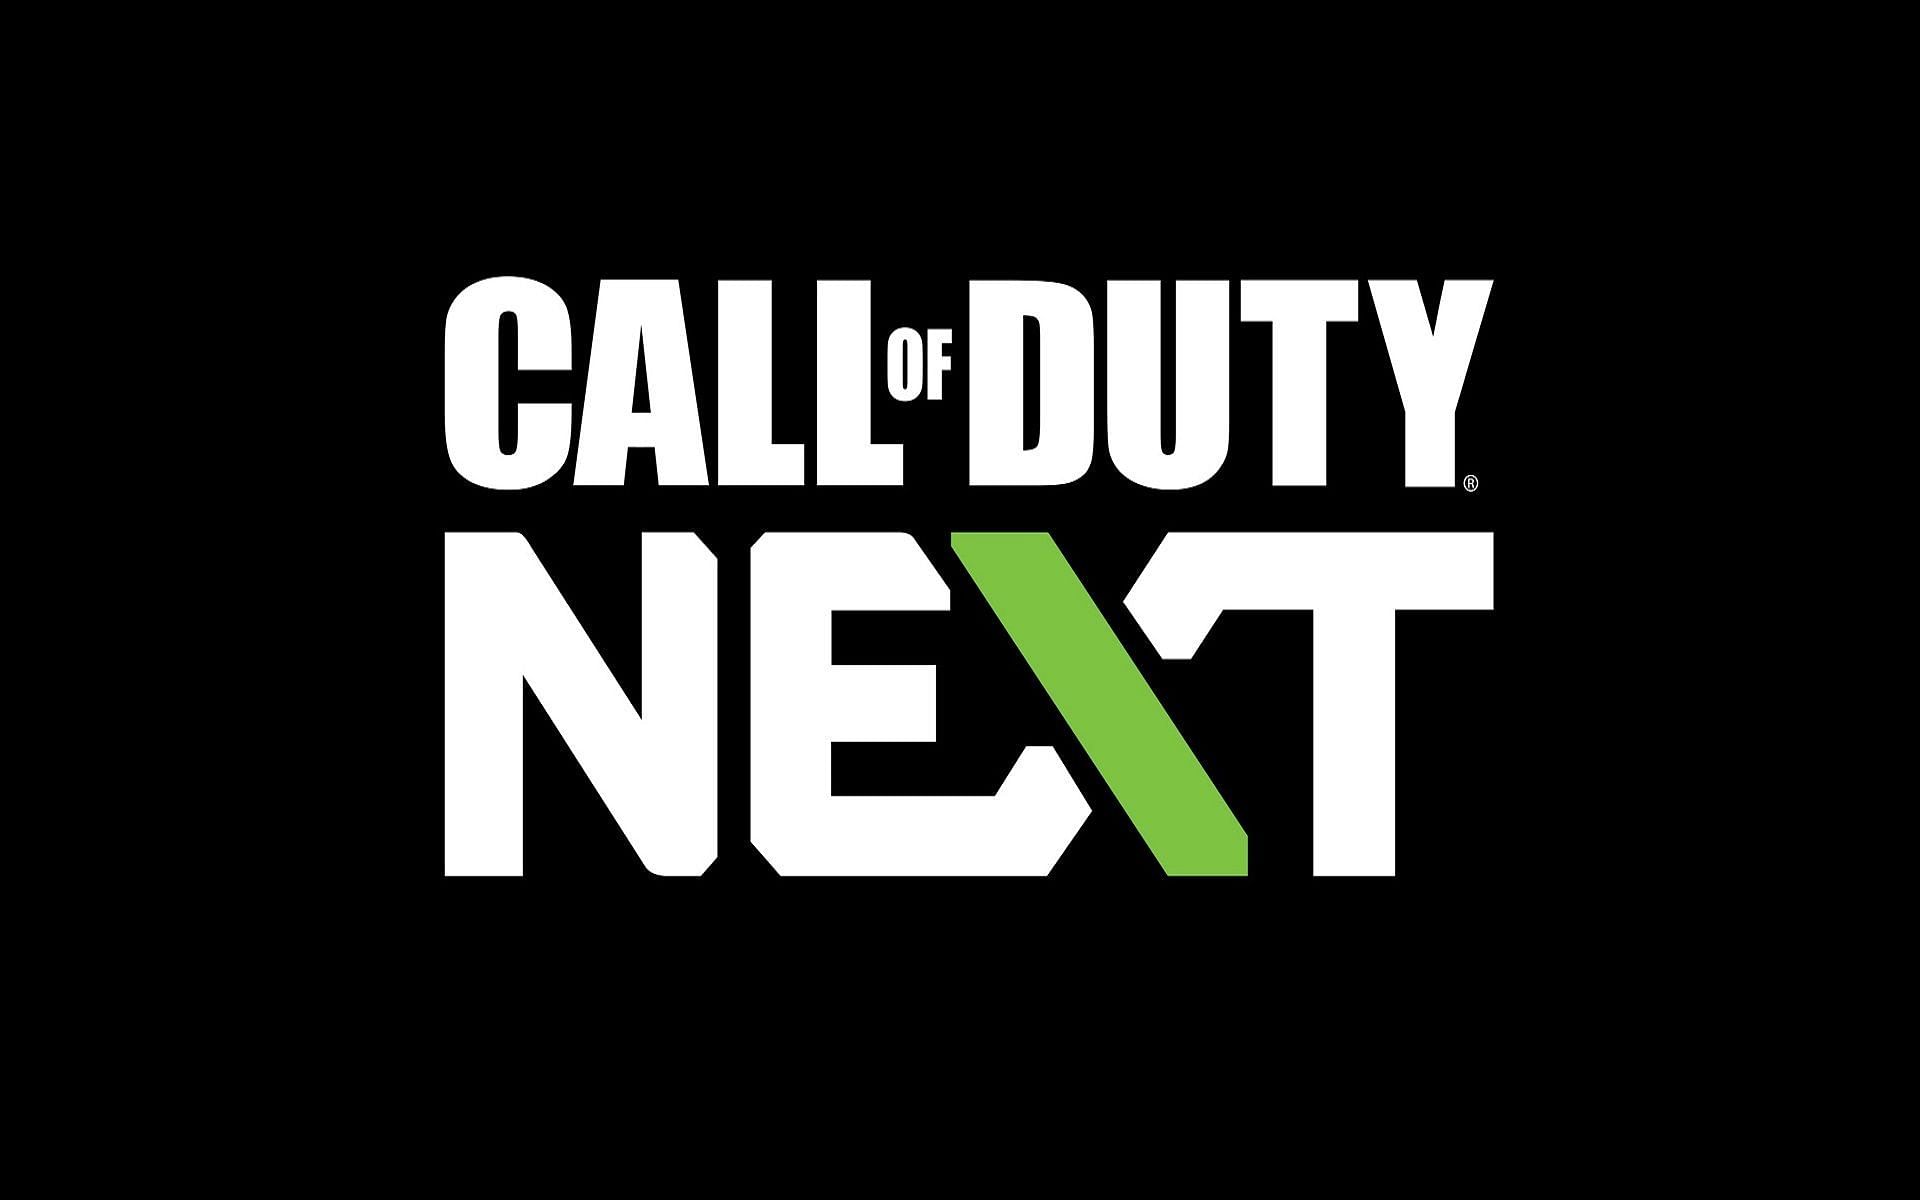 Call of Duty Next event (Image via Activision)